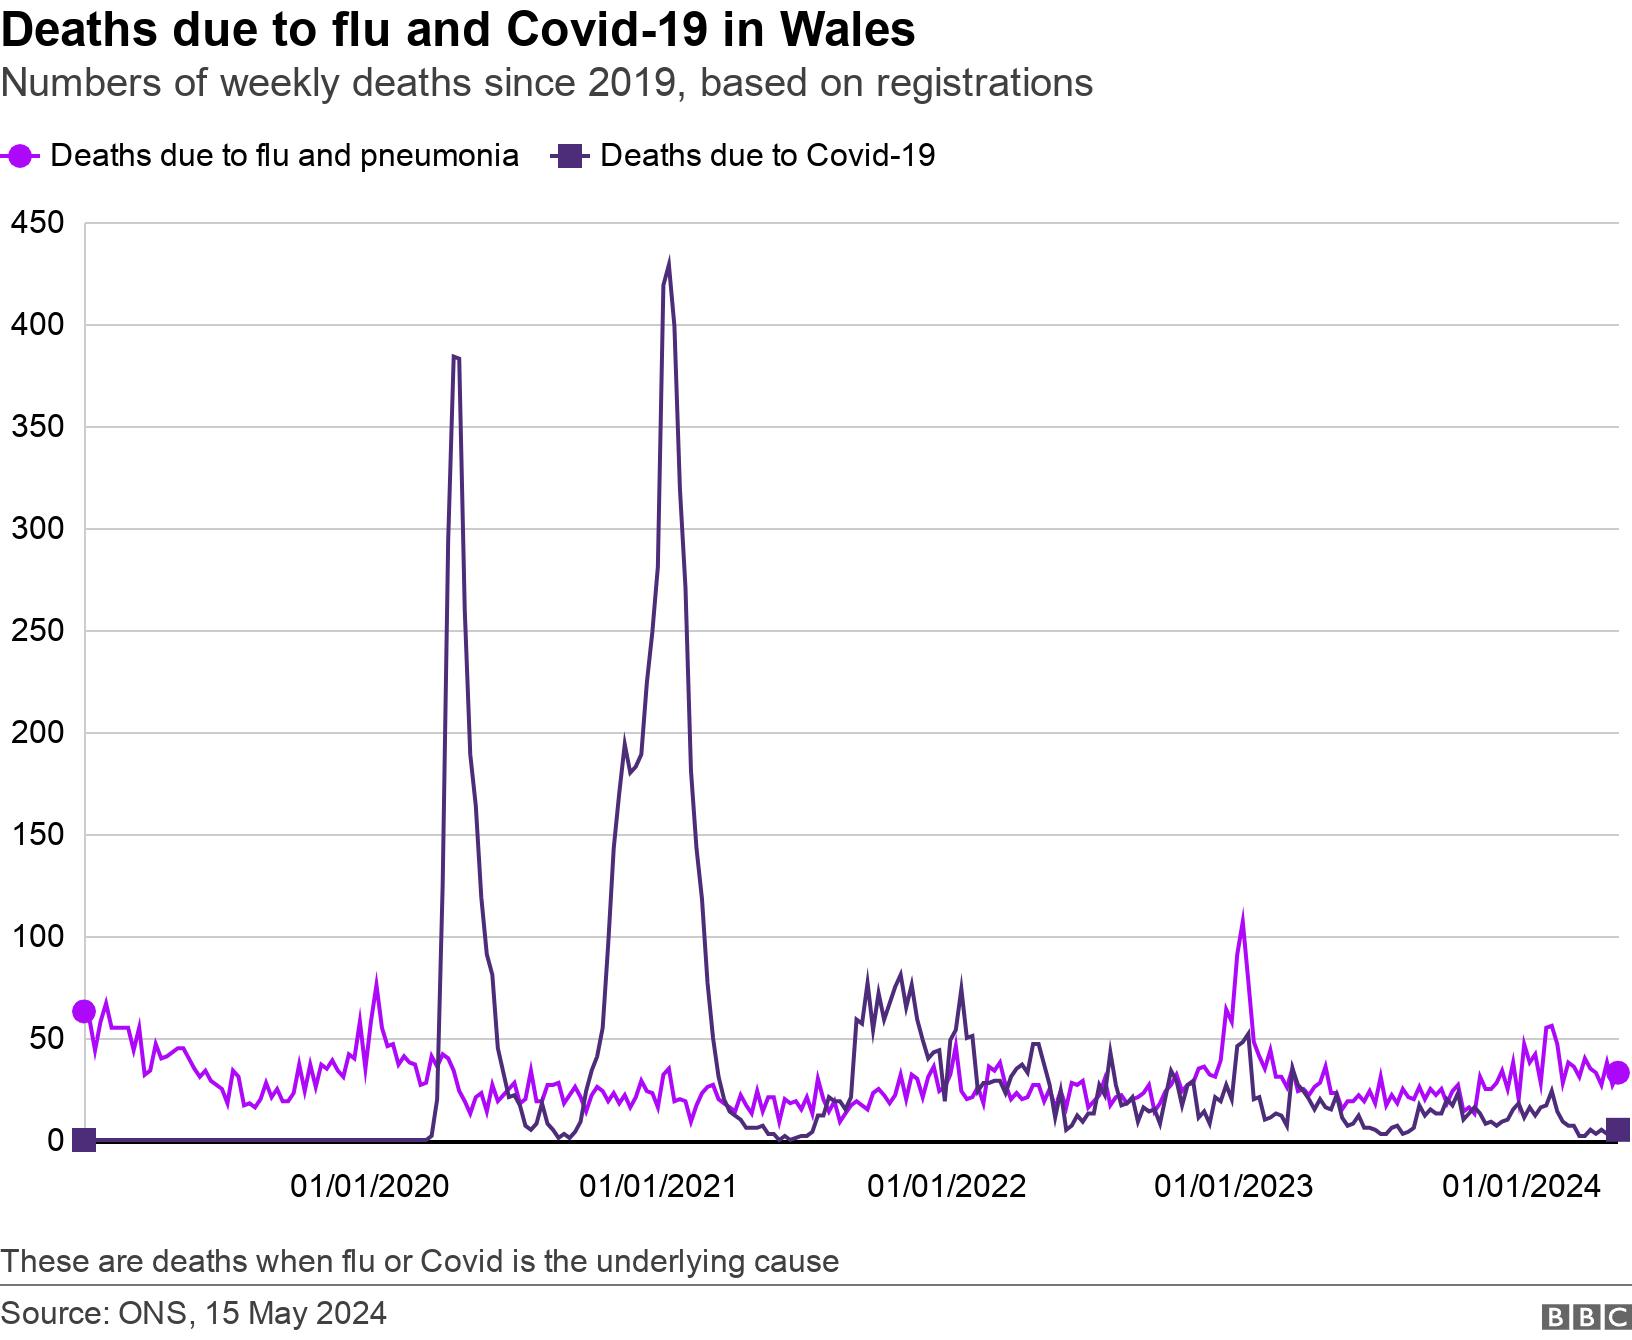 Deaths due to flu and Covid-19 in Wales. Numbers of weekly deaths since 2019, based on registrations.  These are deaths when flu or Covid is the underlying cause.